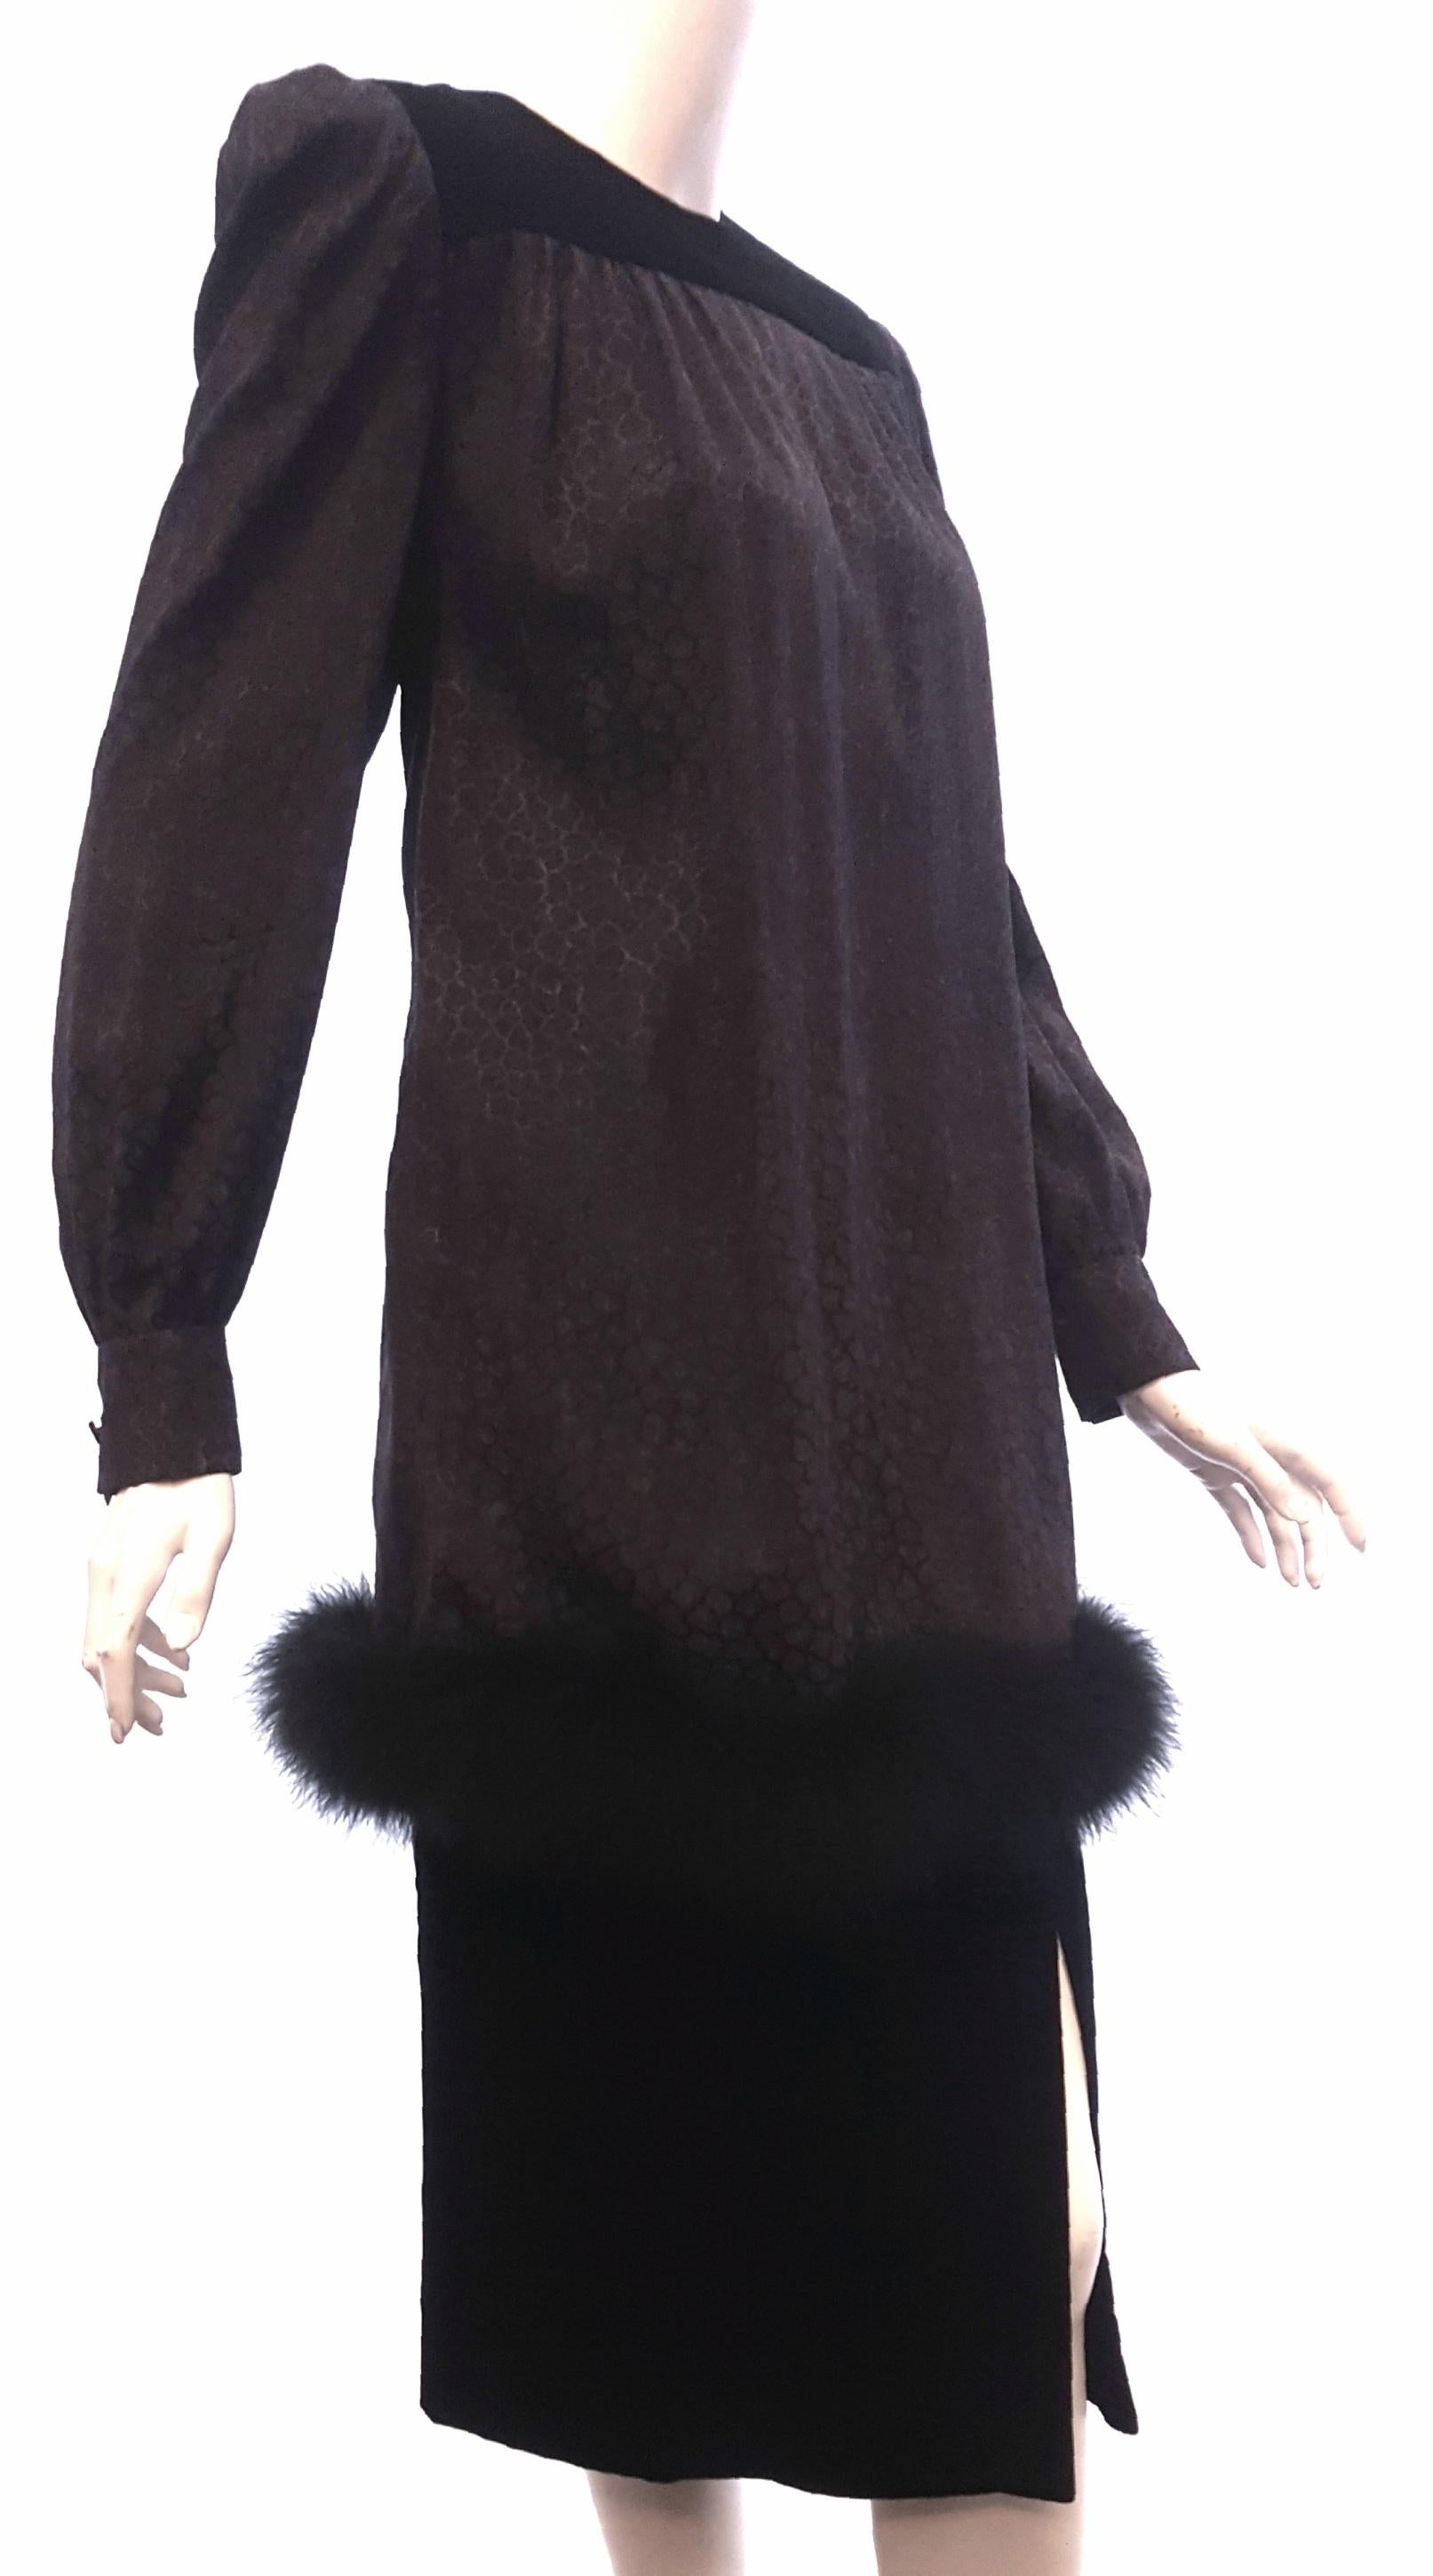 This long sleeve silk vintage dress top with feather trim around the hem also includes a velvet skirt.  The velvet skirt has a side opening slit and is lined.  The top is not lined and has a zipper at the back for closure and buttoned cuffs.  The